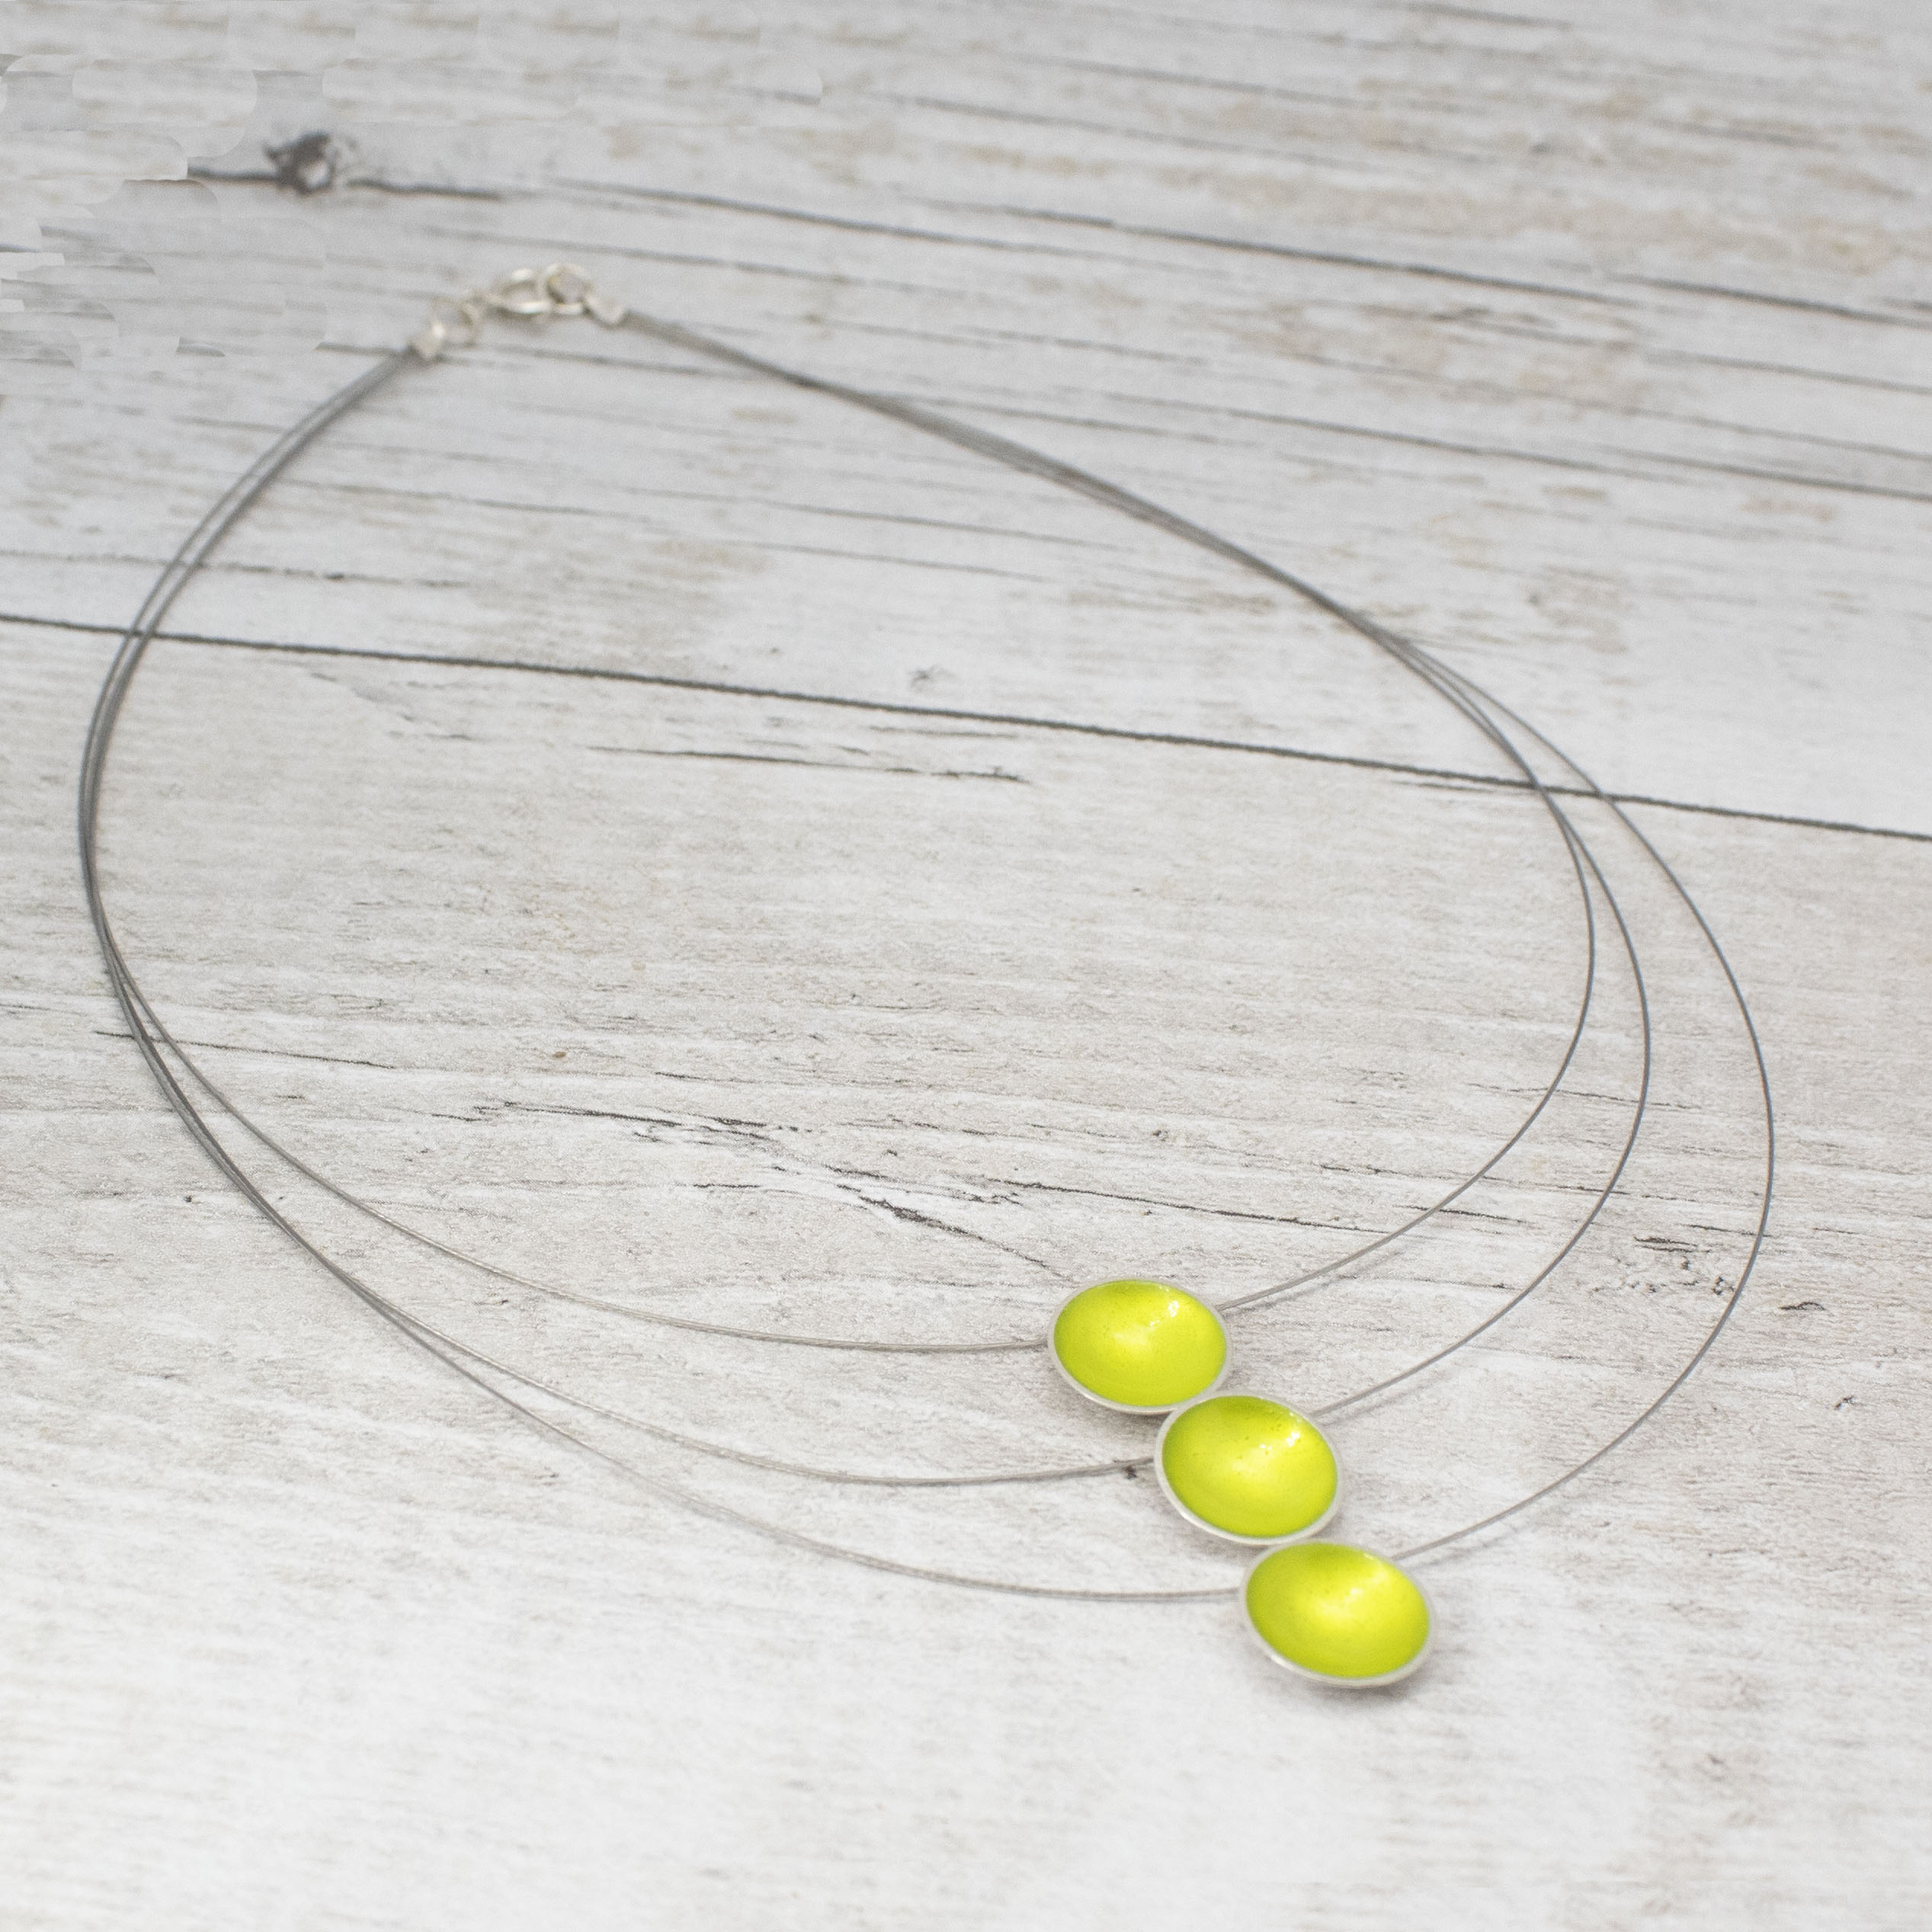 Halo Silver and Enamel Triple Strand Necklace